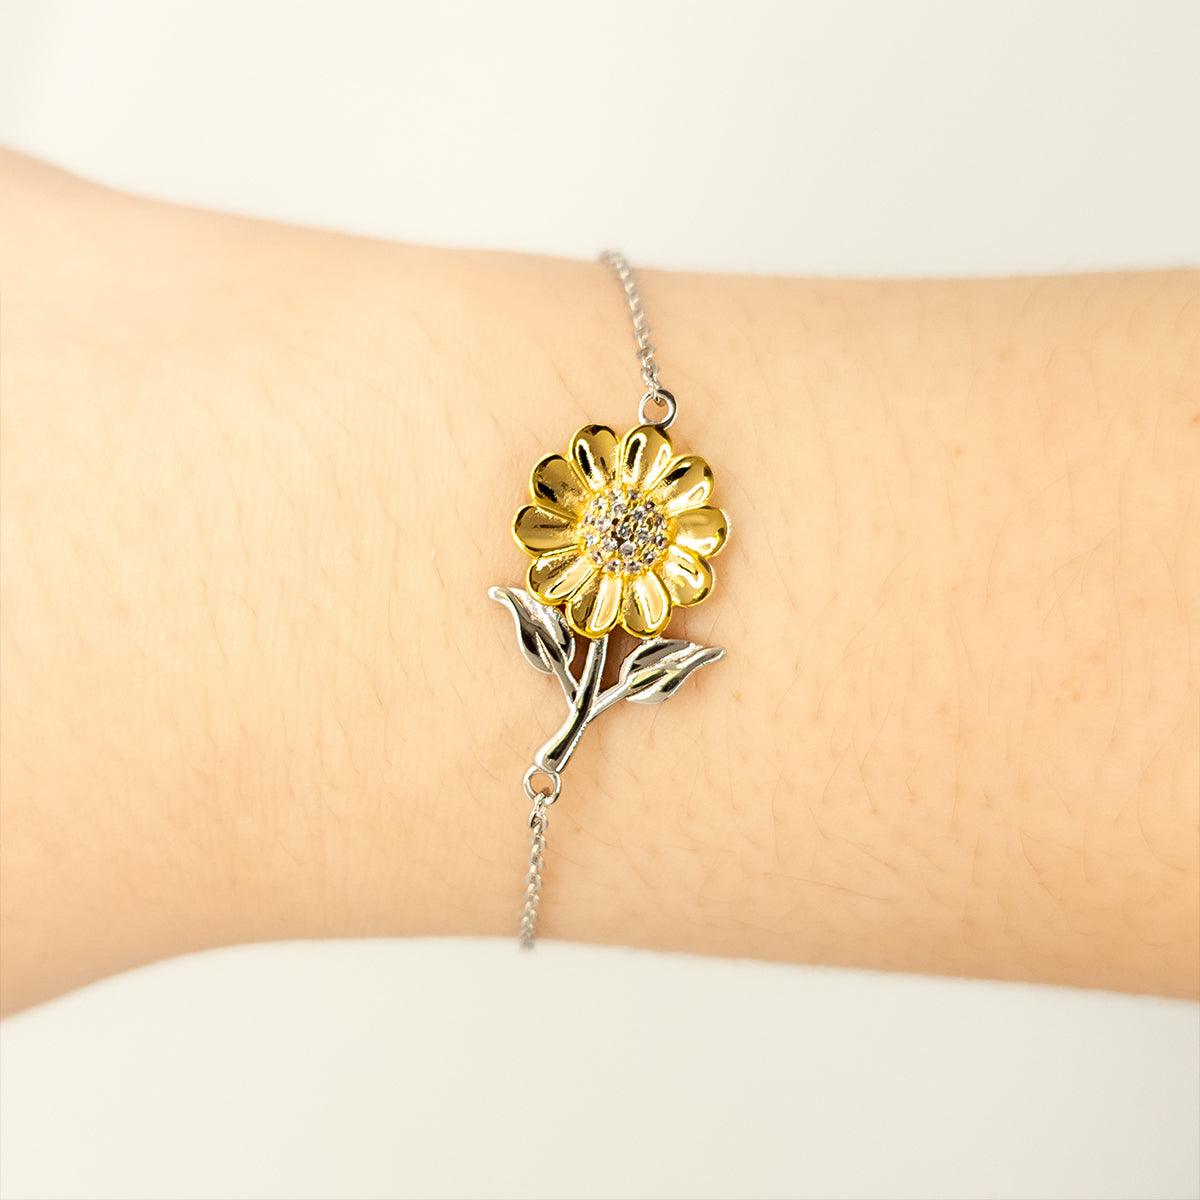 Connecticut is my home Gifts, Lovely Connecticut Birthday Christmas Sunflower Bracelet For People from Connecticut, Men, Women, Friends - Mallard Moon Gift Shop